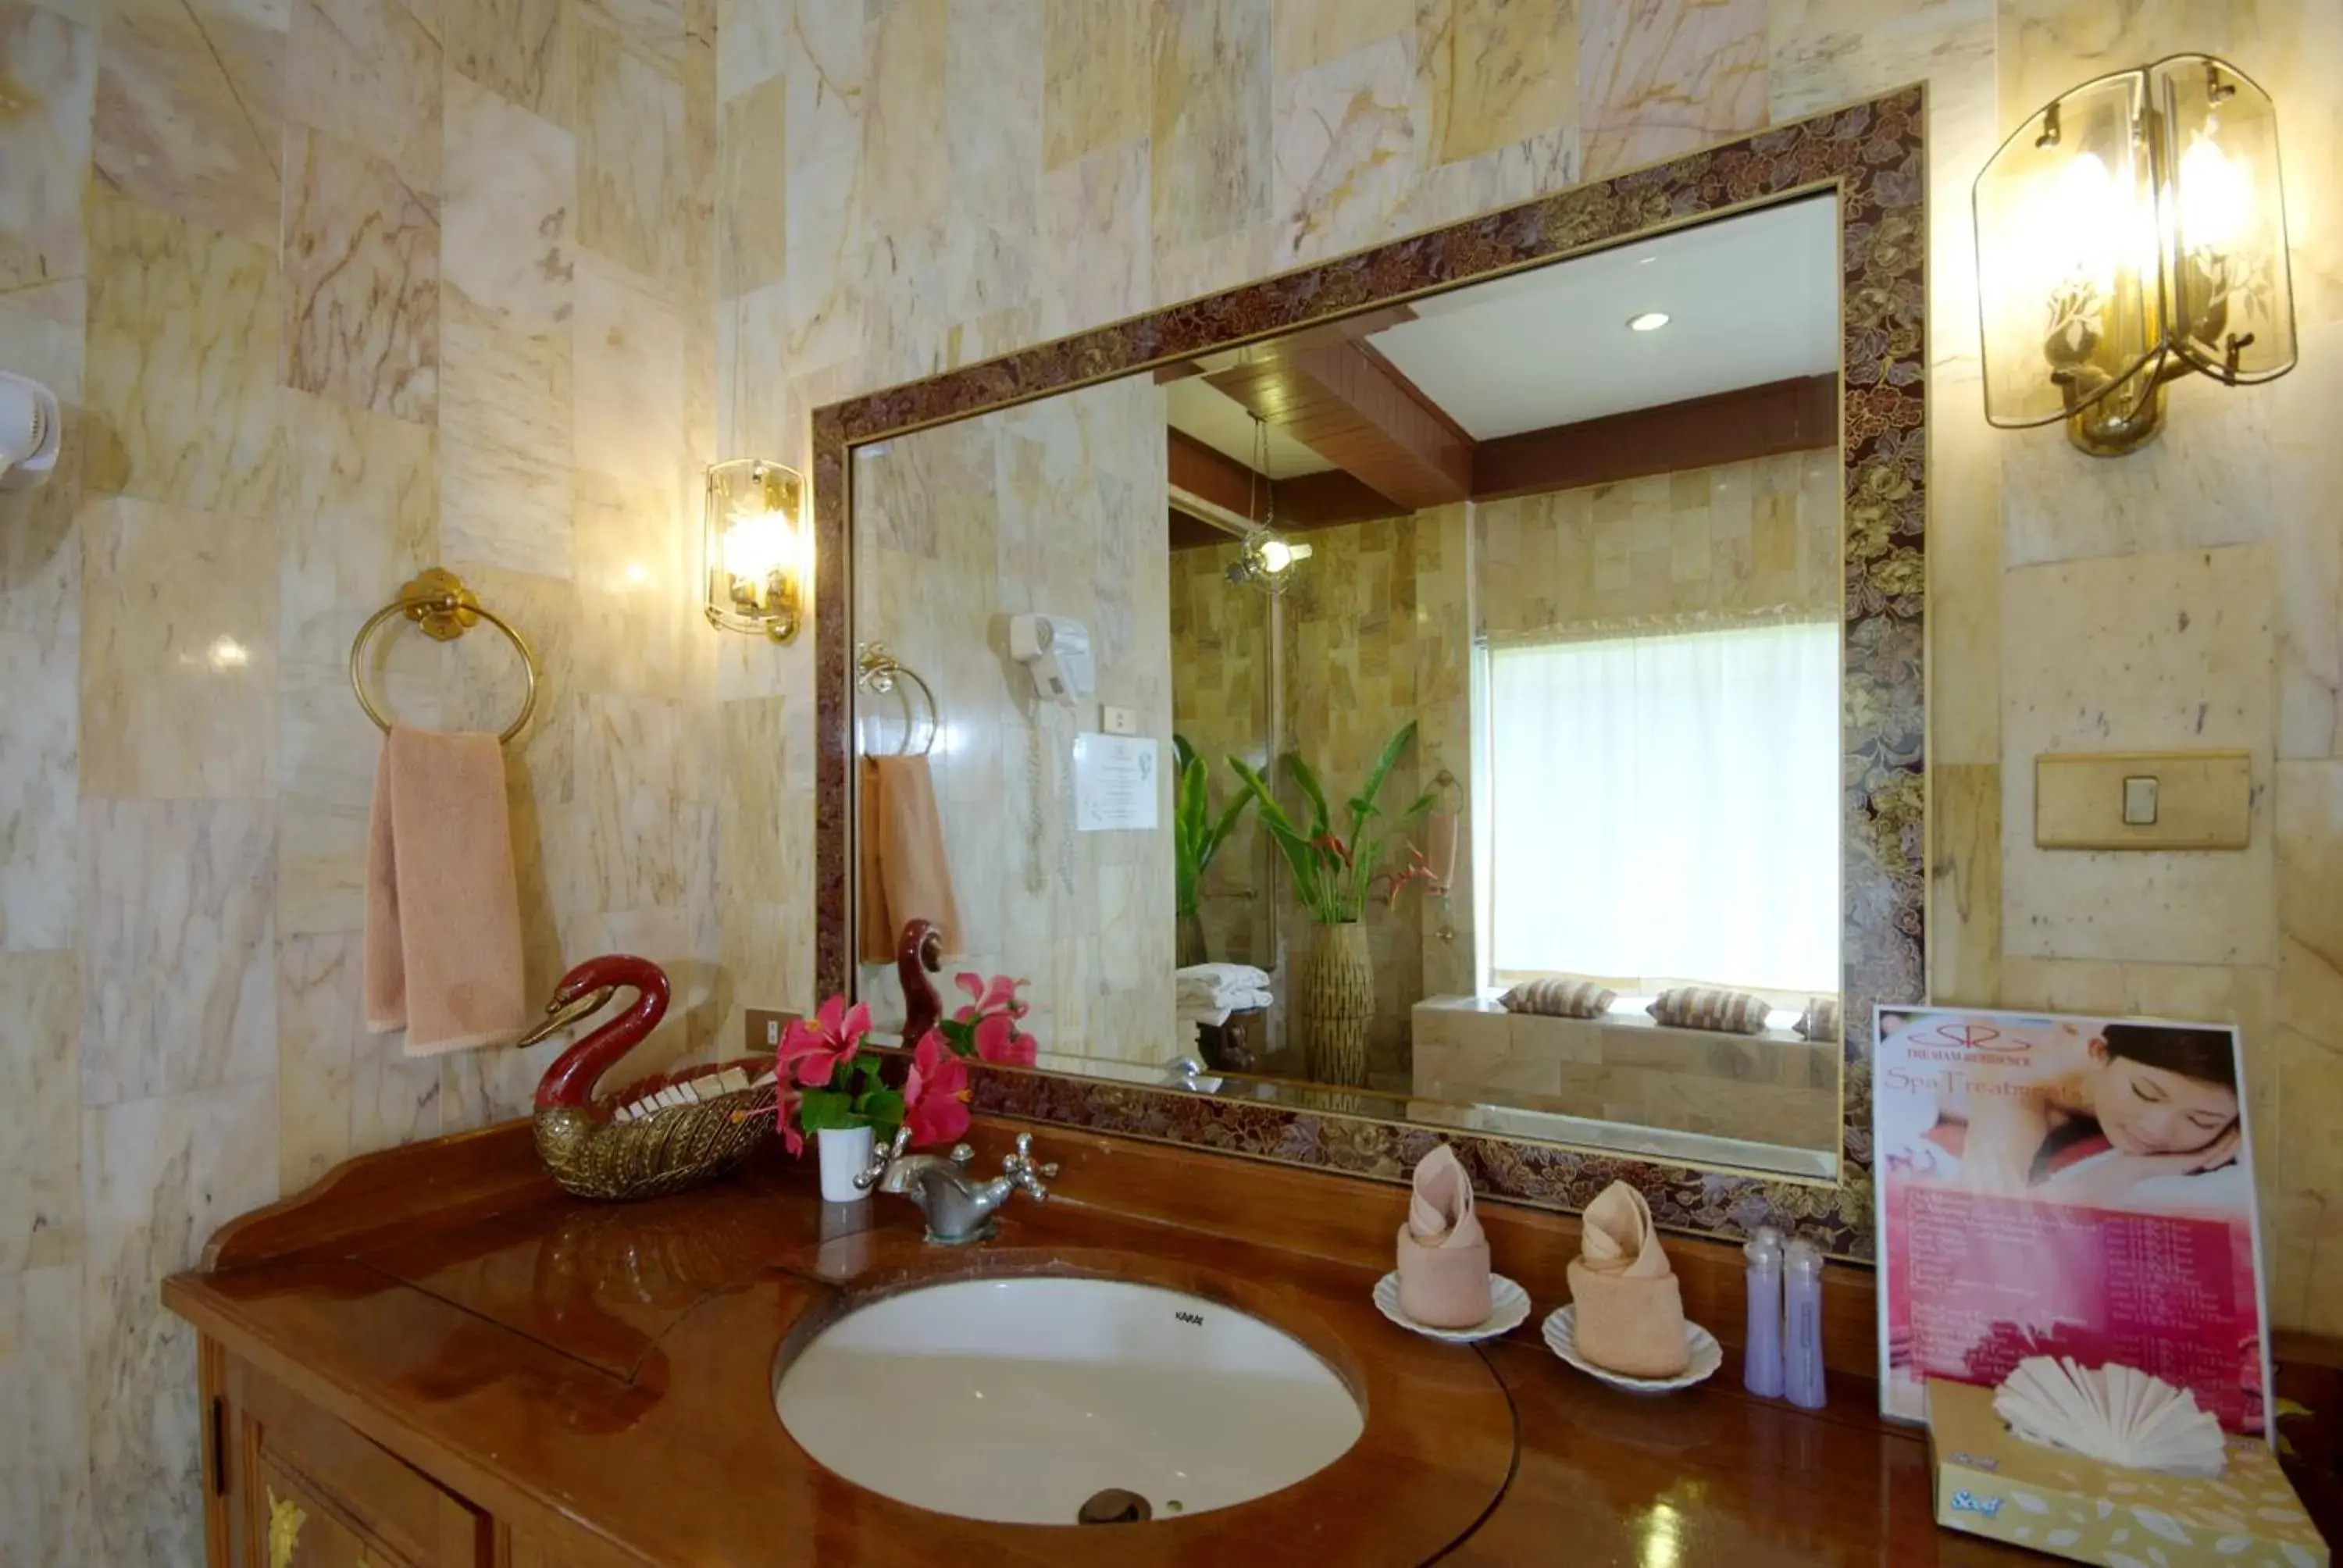 Bathroom in The Siam Residence Boutique Resort